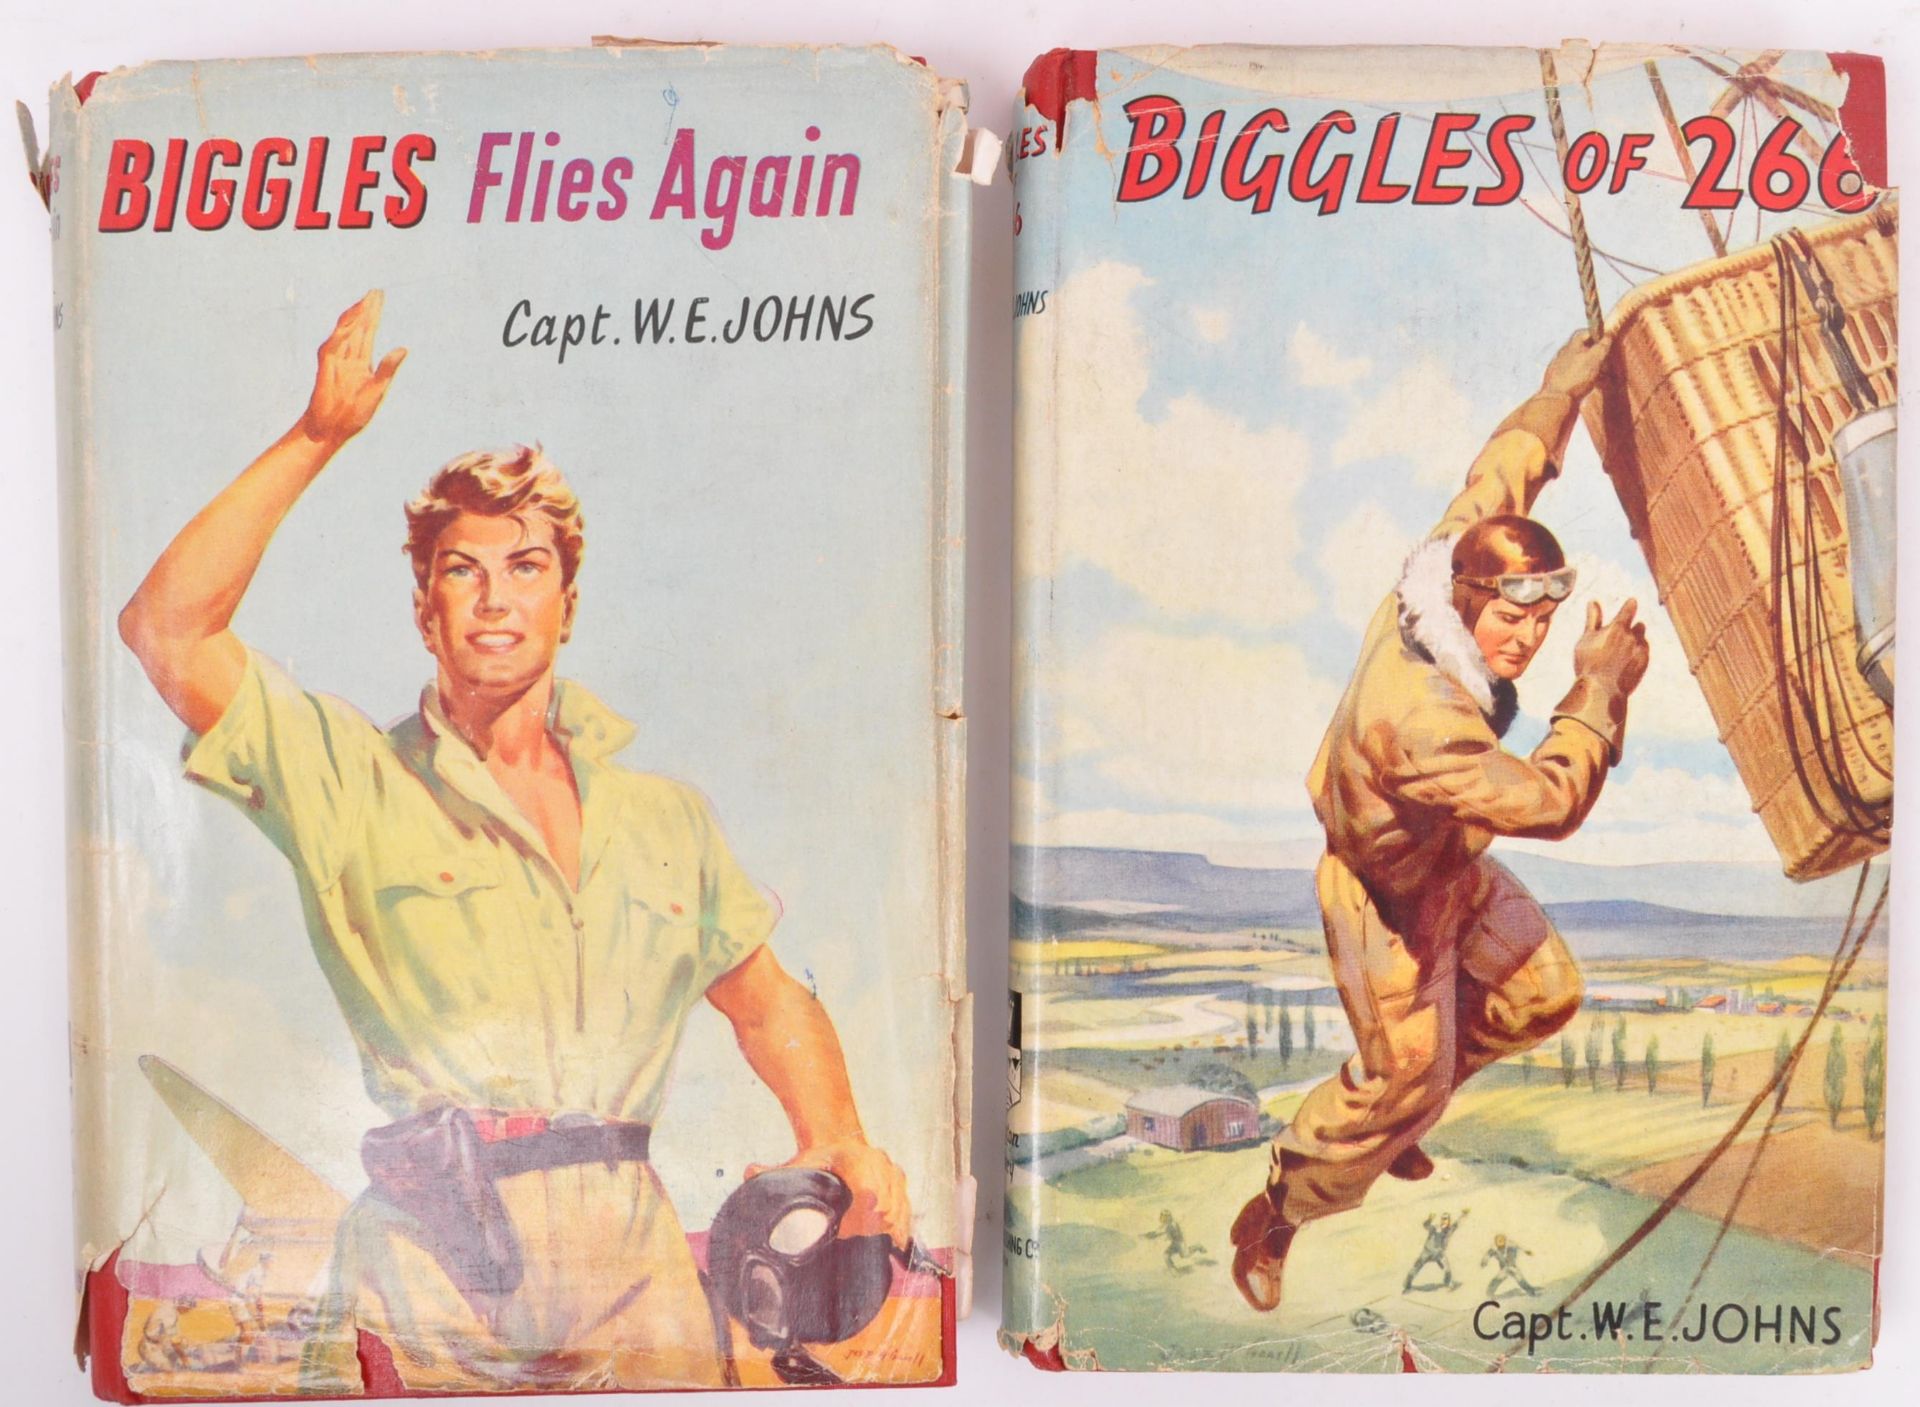 COLLECTION OF NINETEEN BIGGLES BOOKS BY CAPTAIN W.E. JOHNS - Image 9 of 10